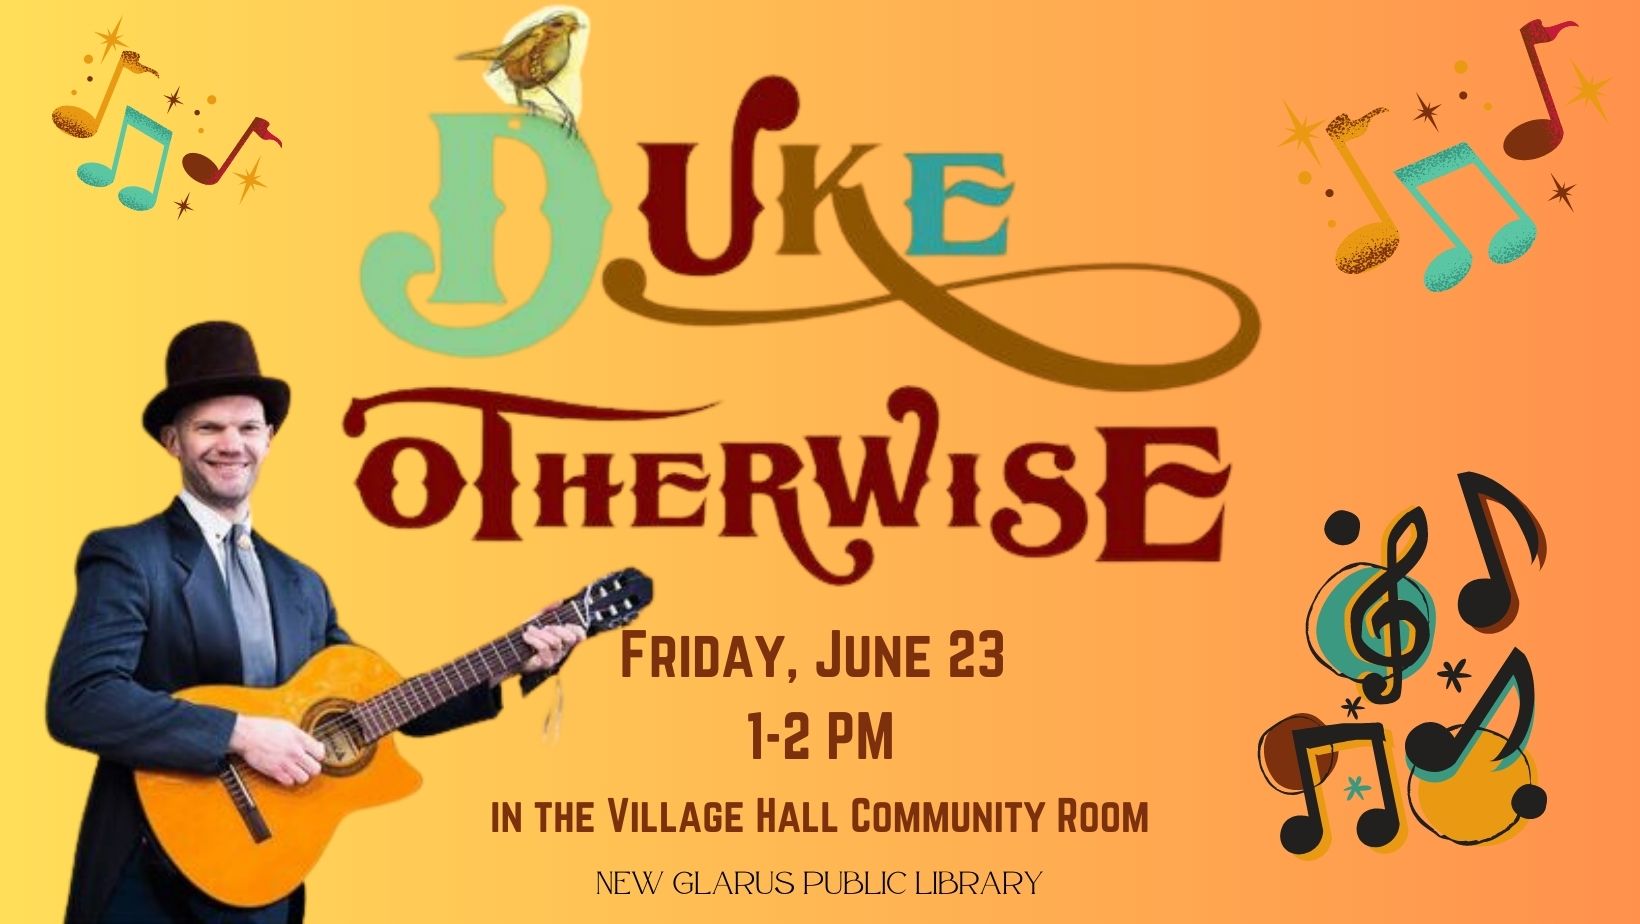 Duke Otherwise in Concert